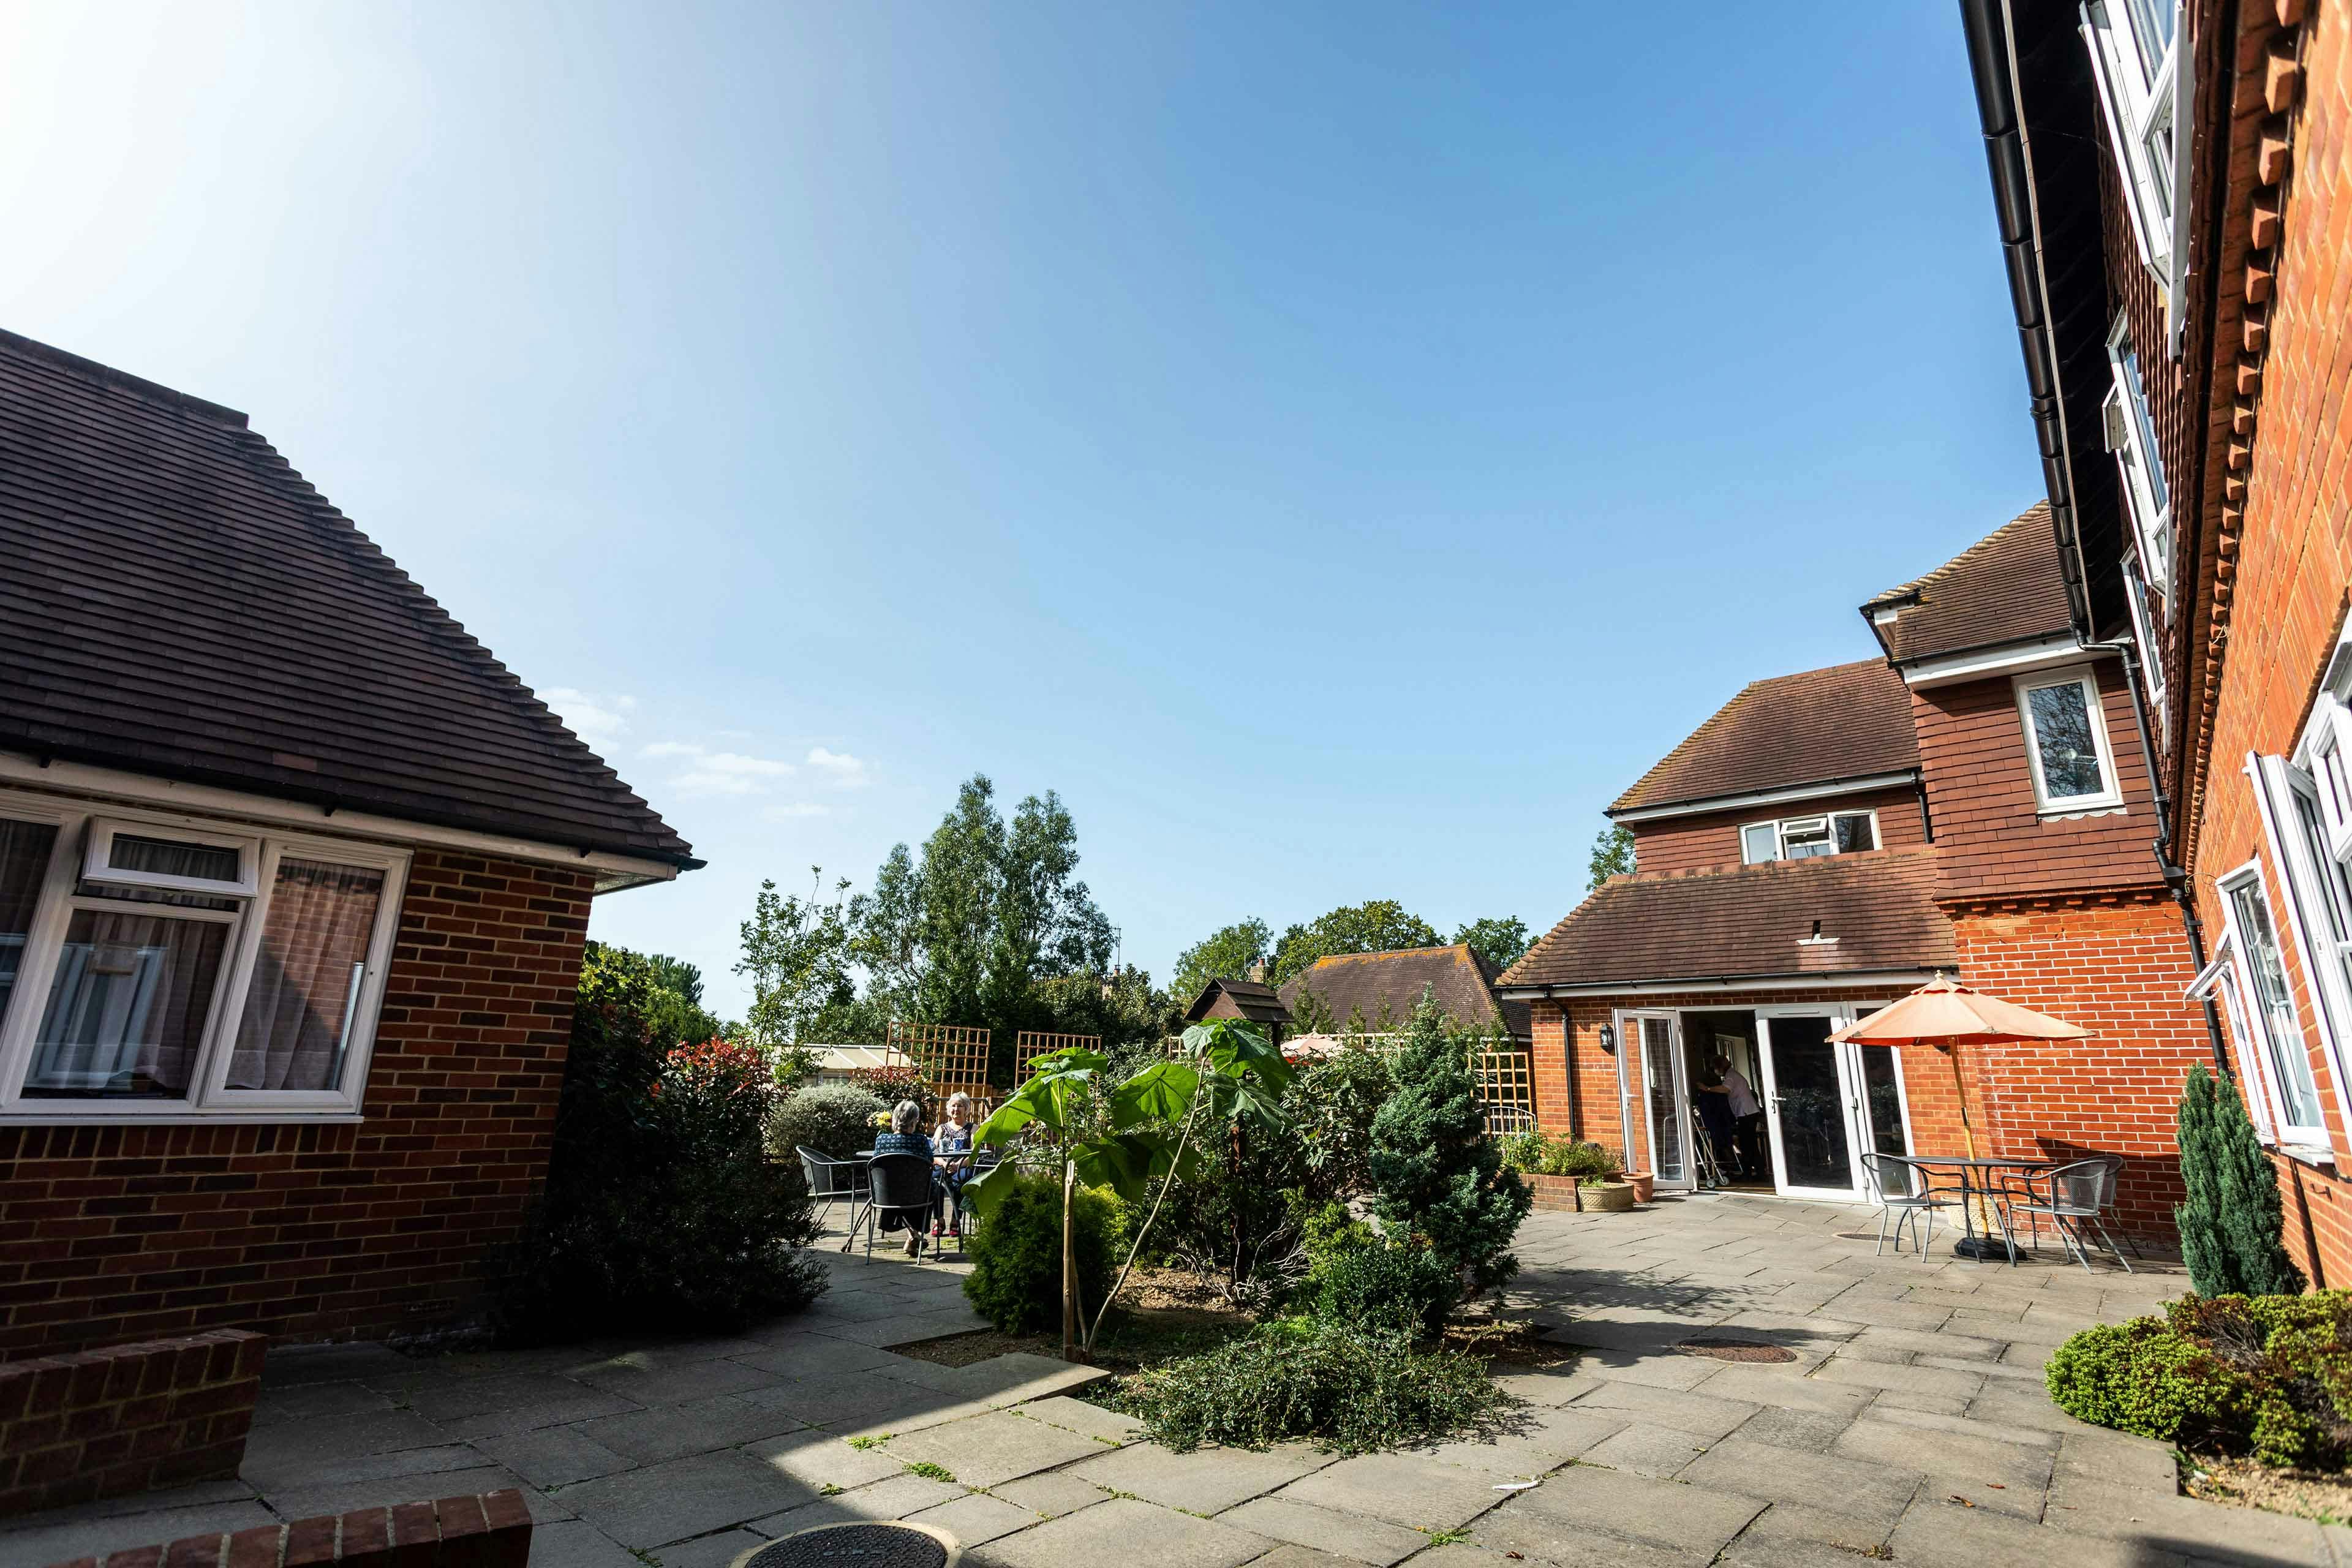 Garden of Edendale Lodge care home in Battle, East Sussex